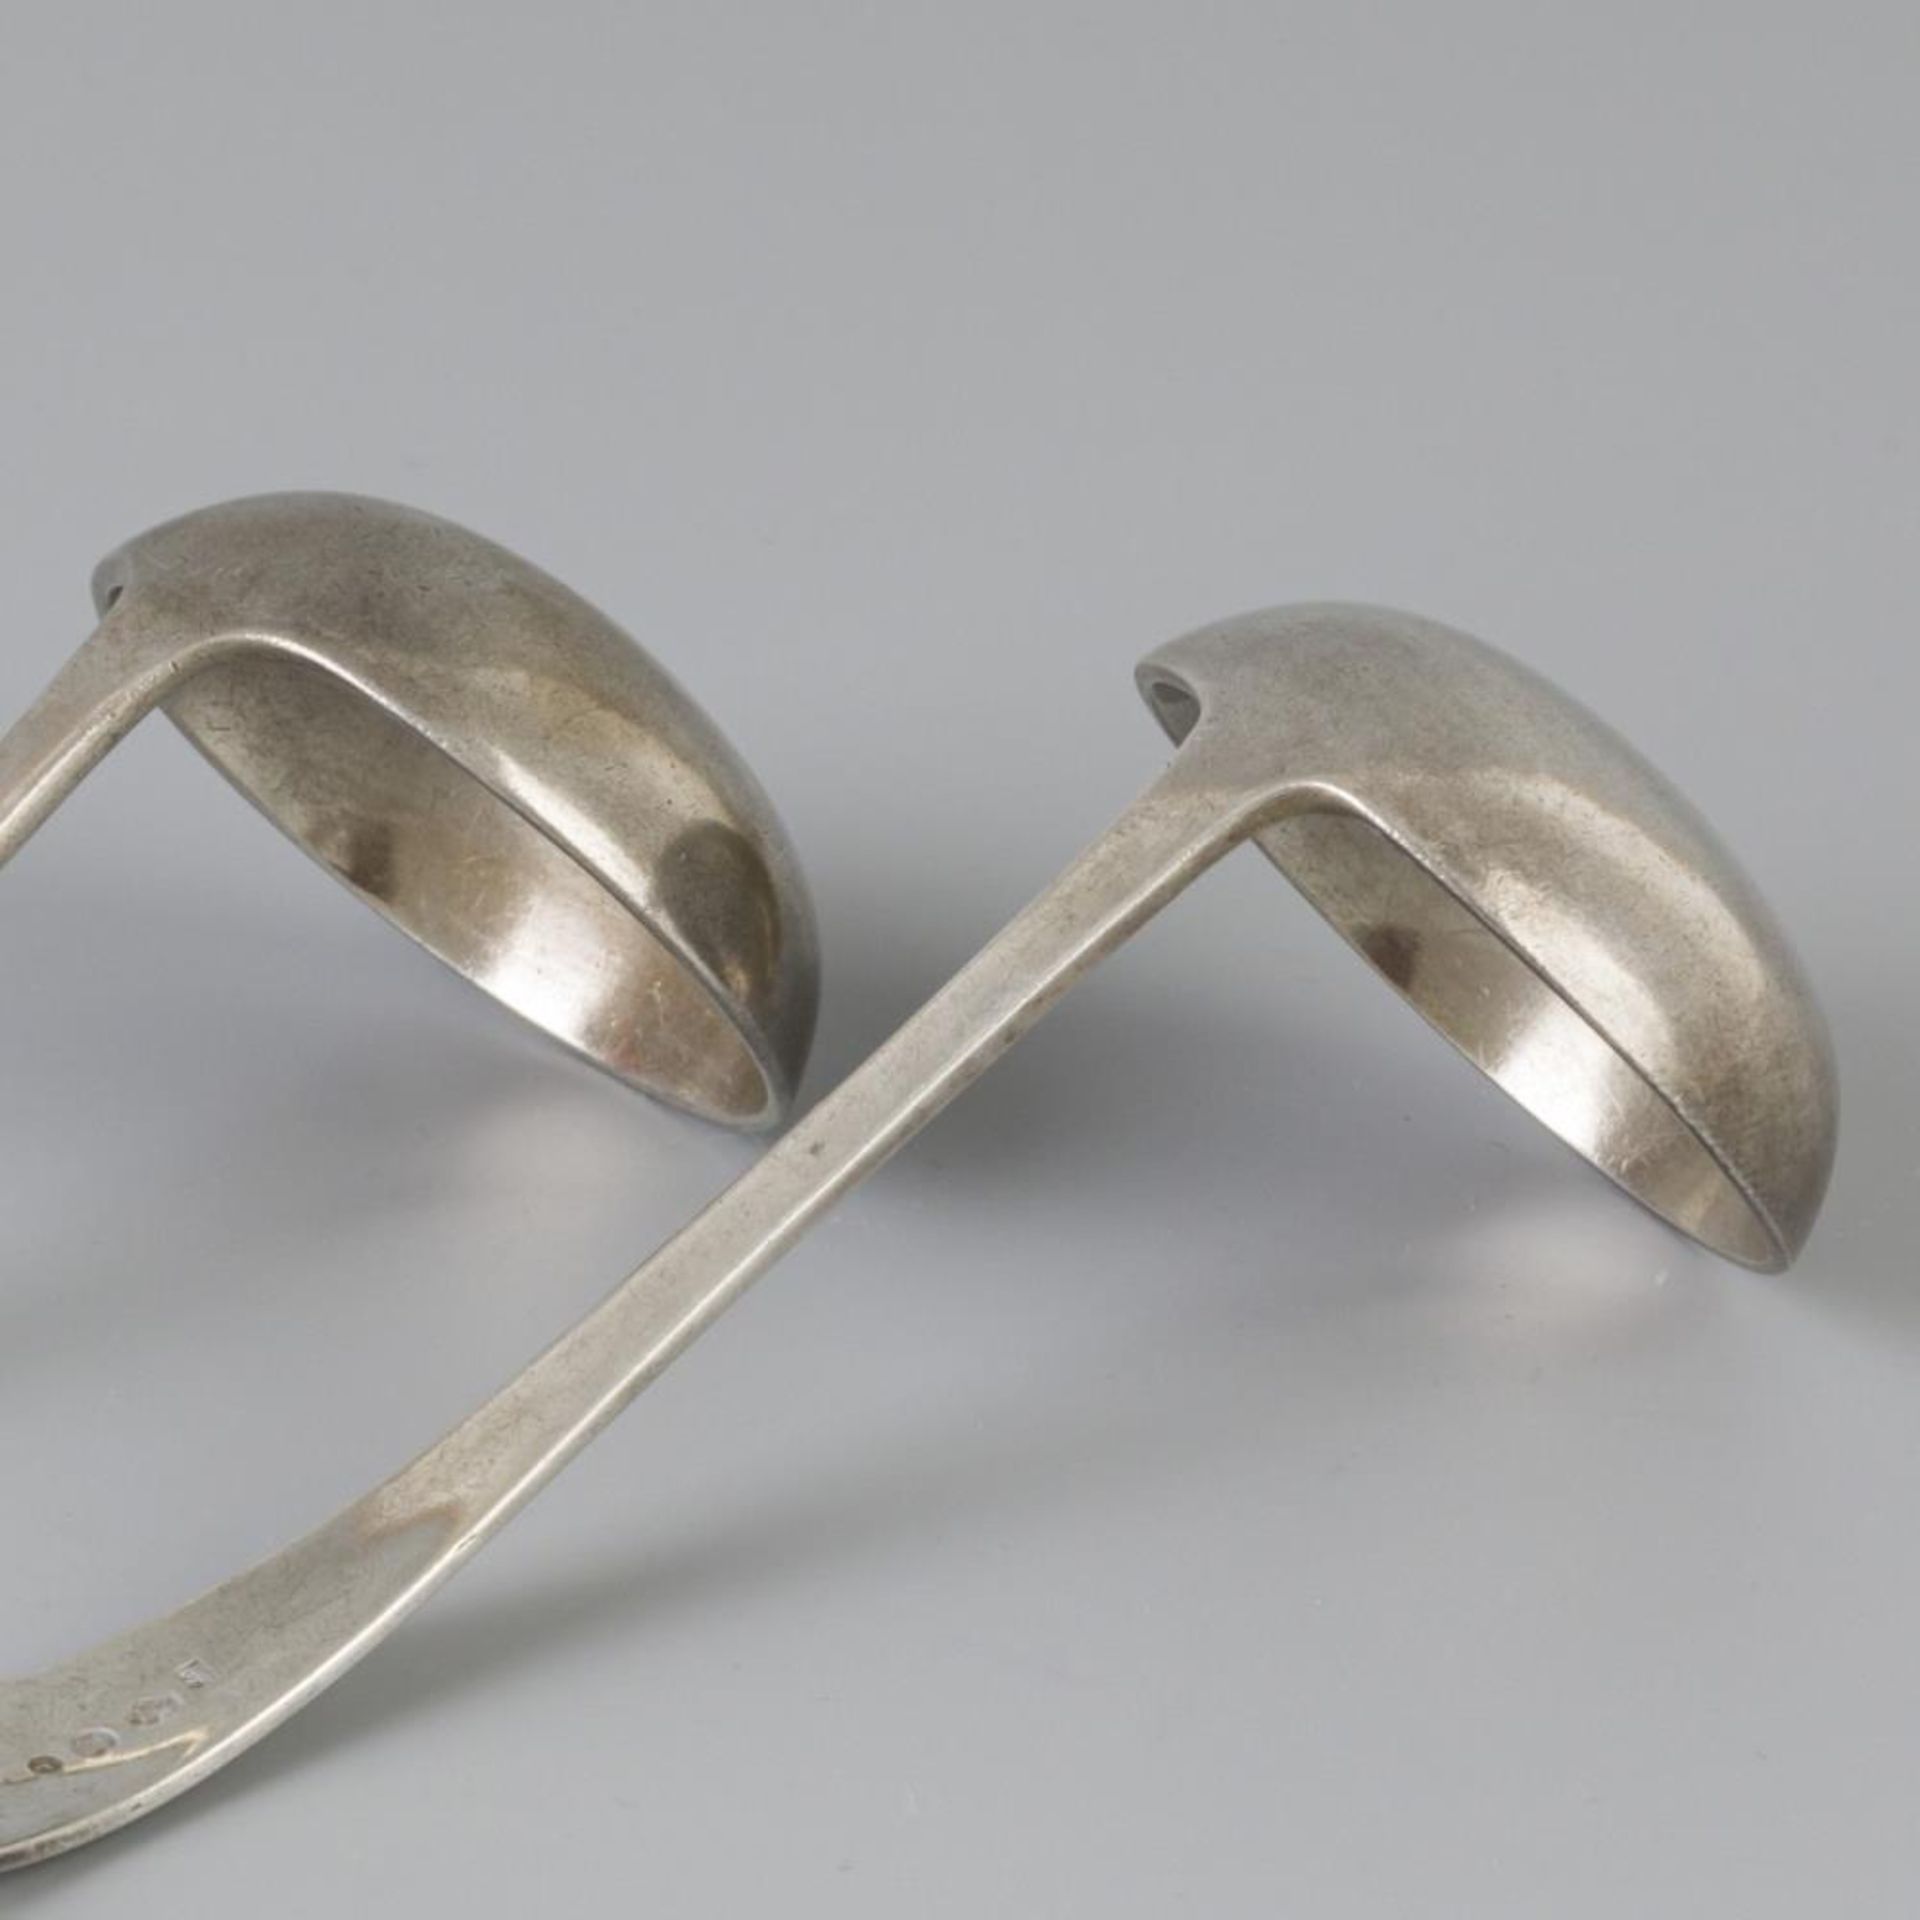 2 piece set of sauce spoons "Haags Lofje" silver. - Image 4 of 5